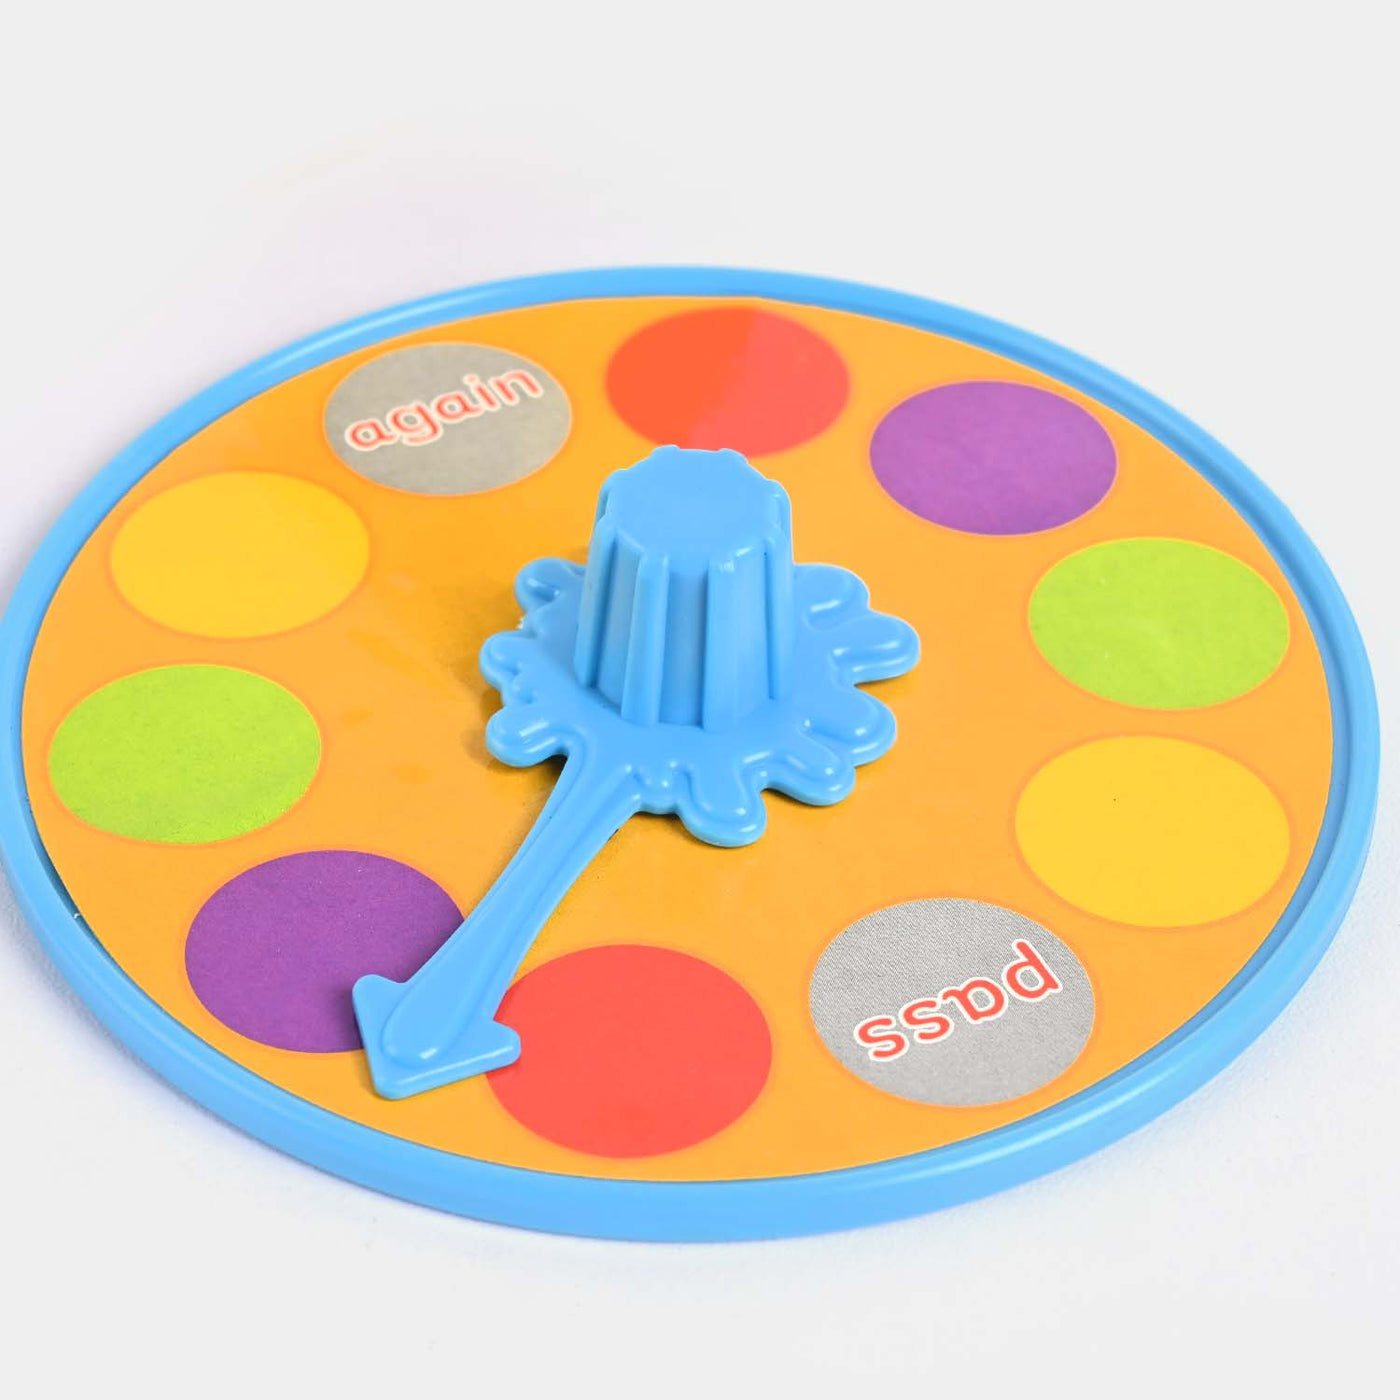 Mouse Love Cheese Game For Kids